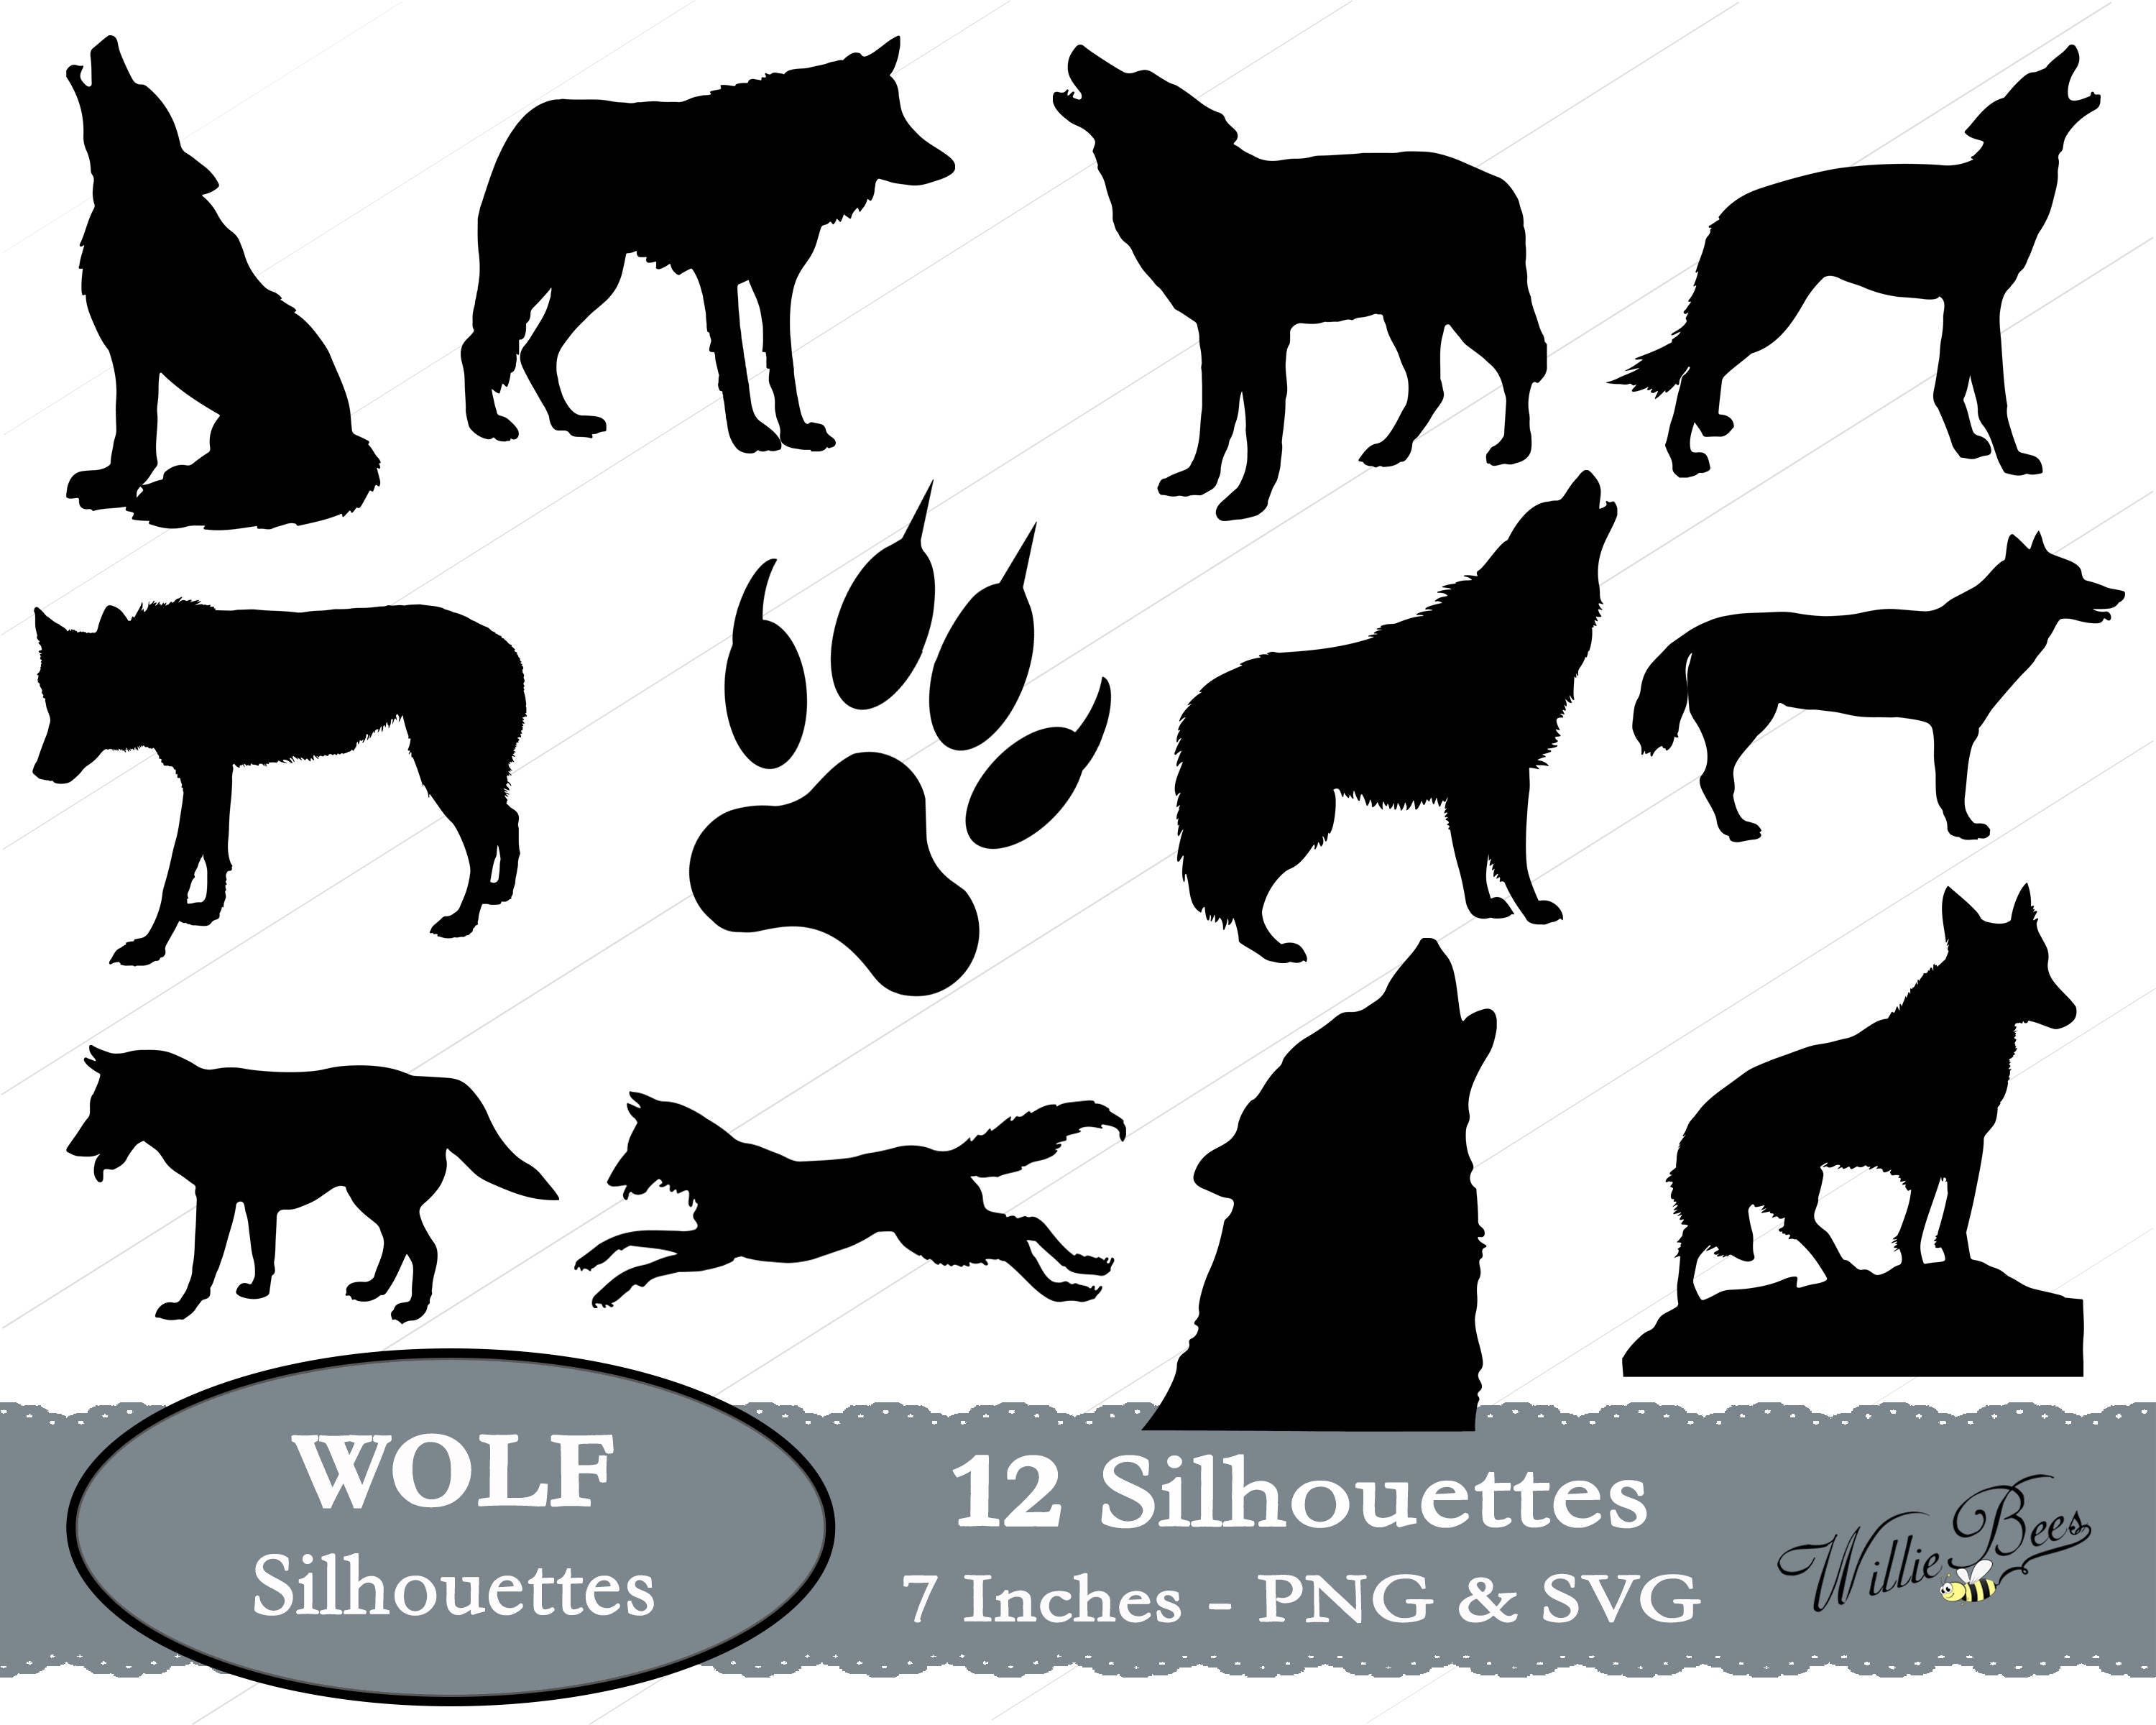 Wolf SVG Wolf Silhouette Clip Art Wolves Timber Wolf Grey